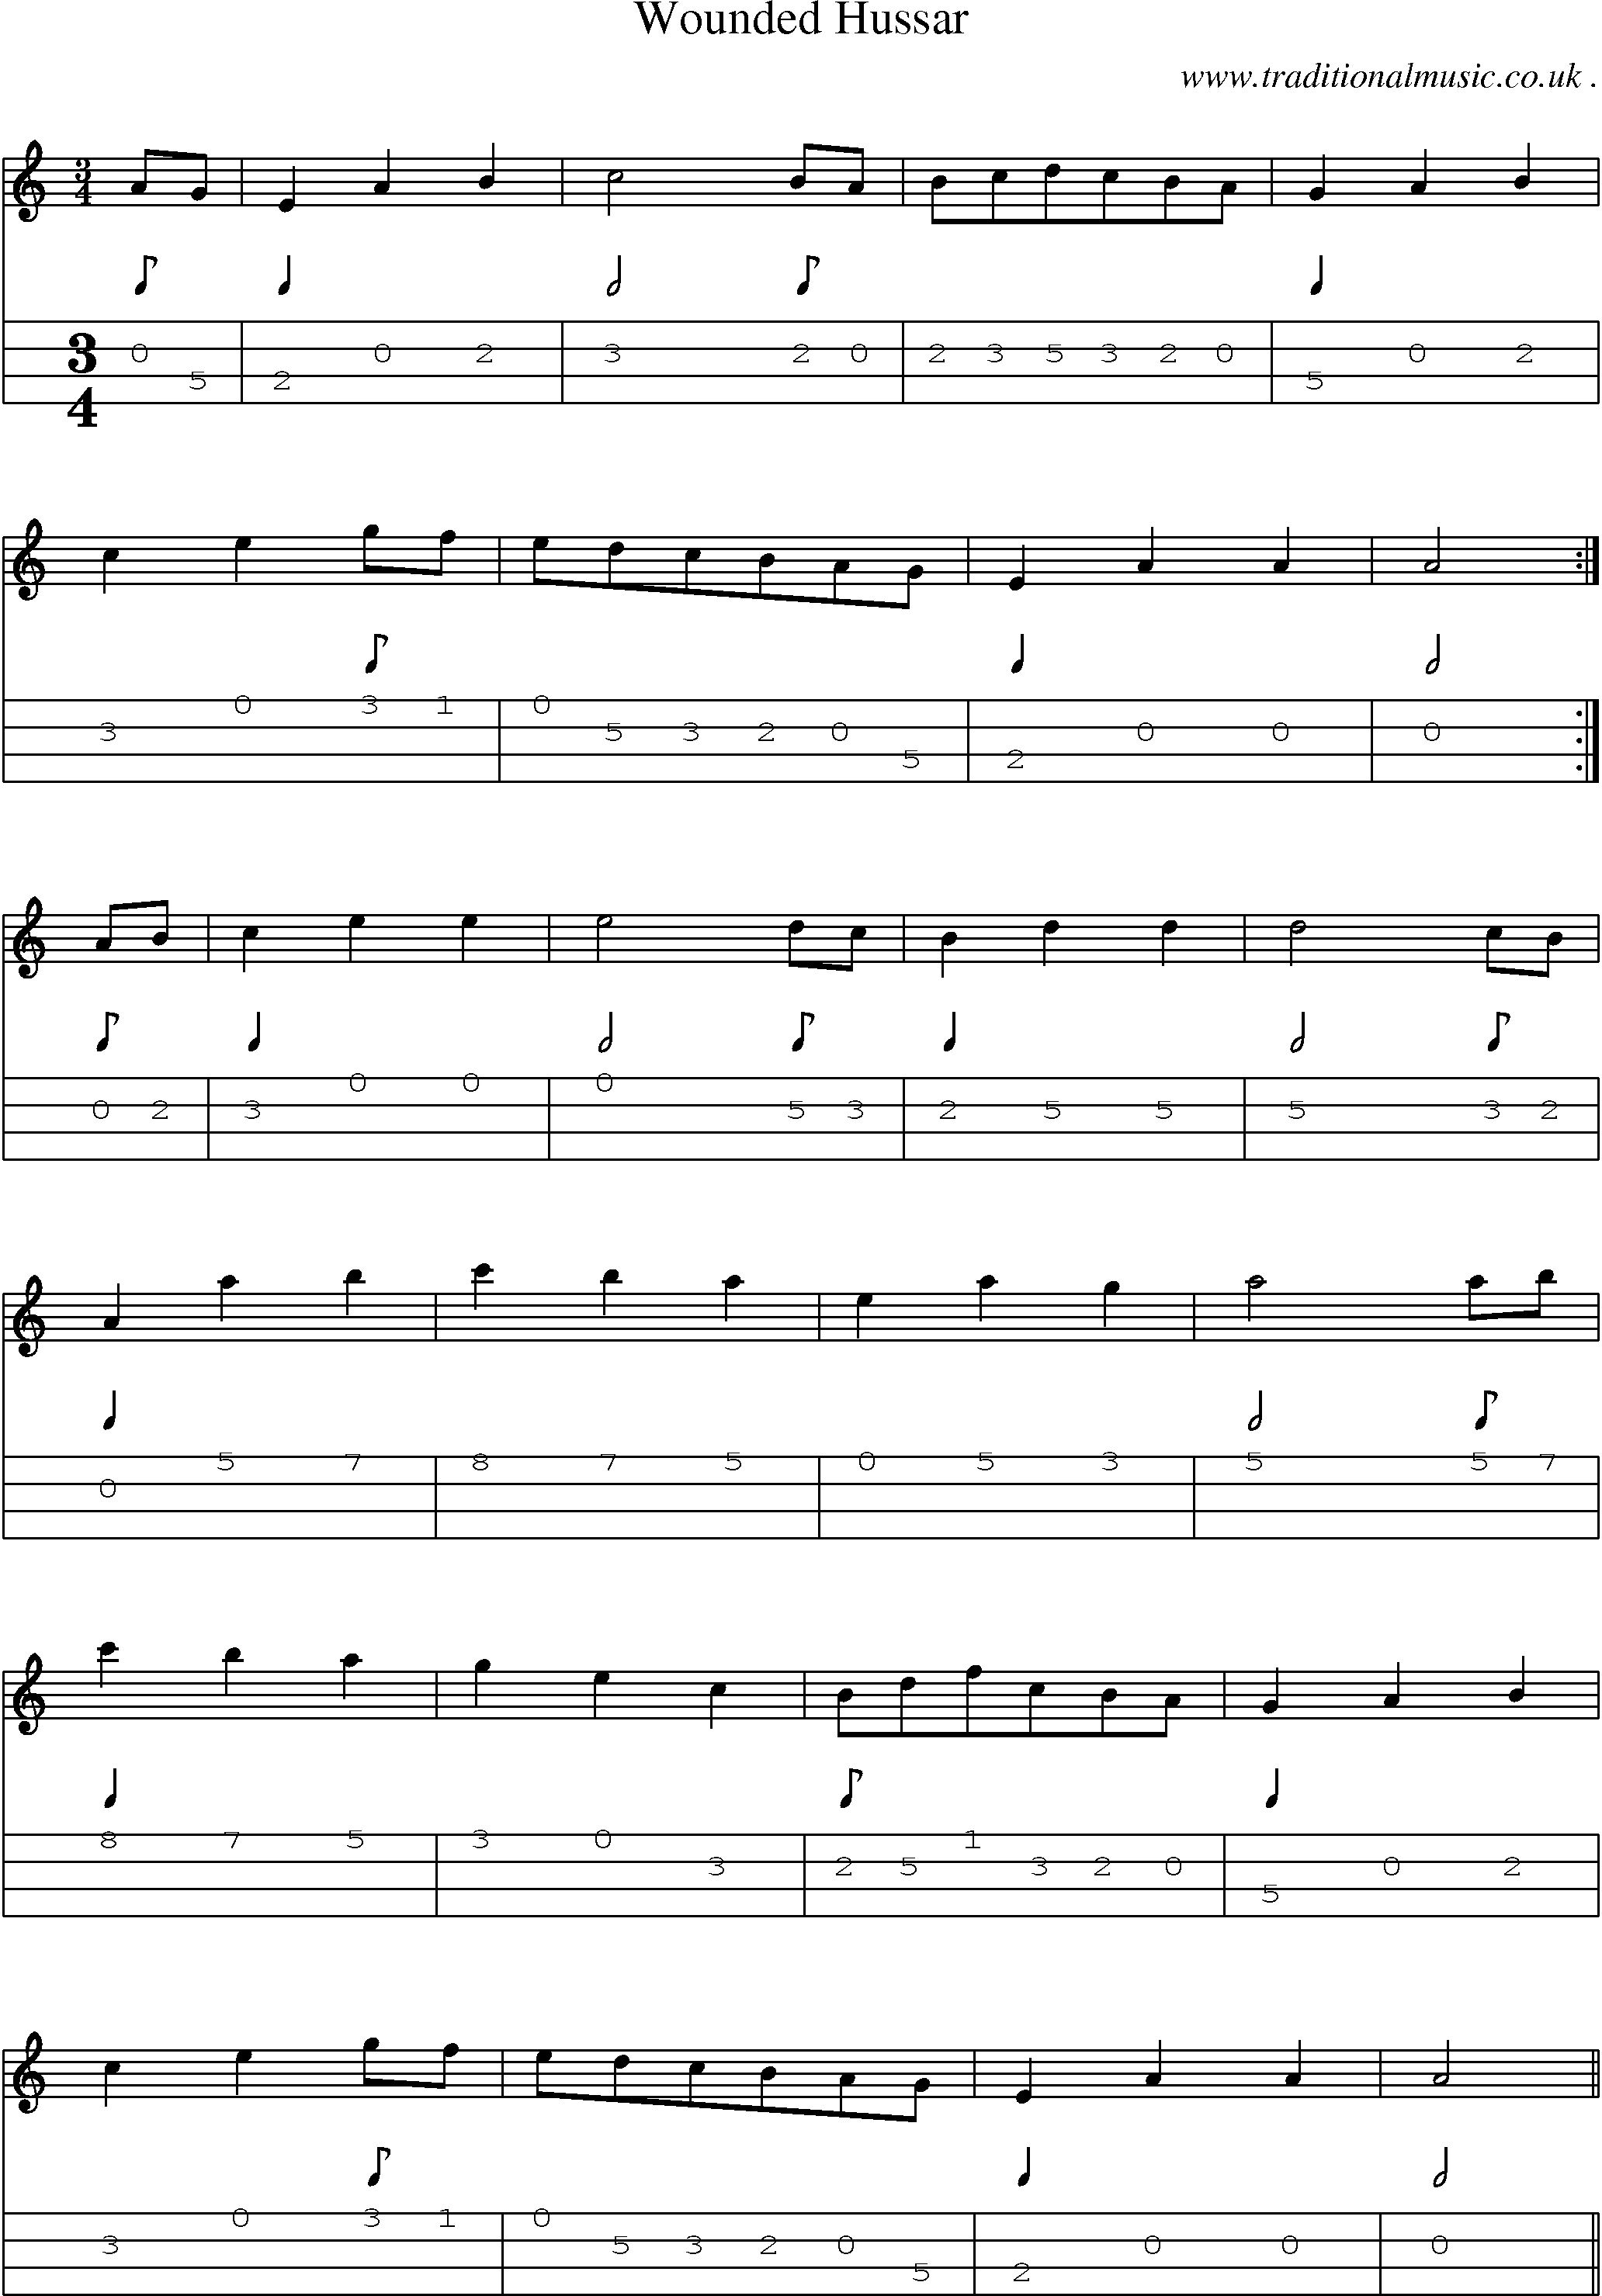 Sheet-Music and Mandolin Tabs for Wounded Hussar